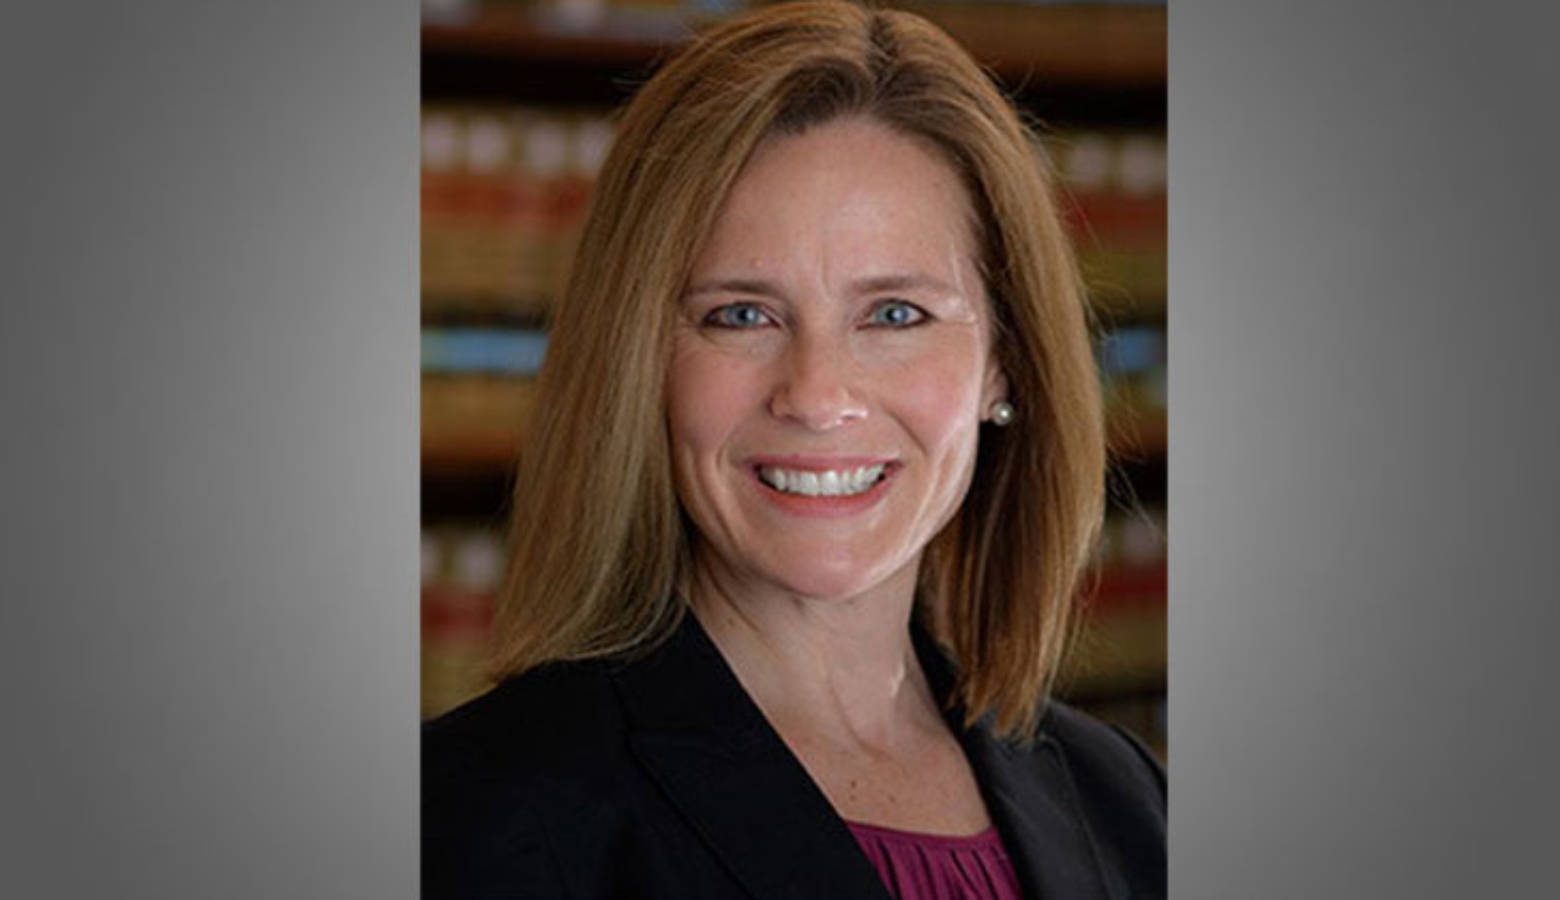 Seventh Circuit Court of Appeals Judge Amy Coney Barrett is on President Donald Trump's list of potential Supreme Court nominees.